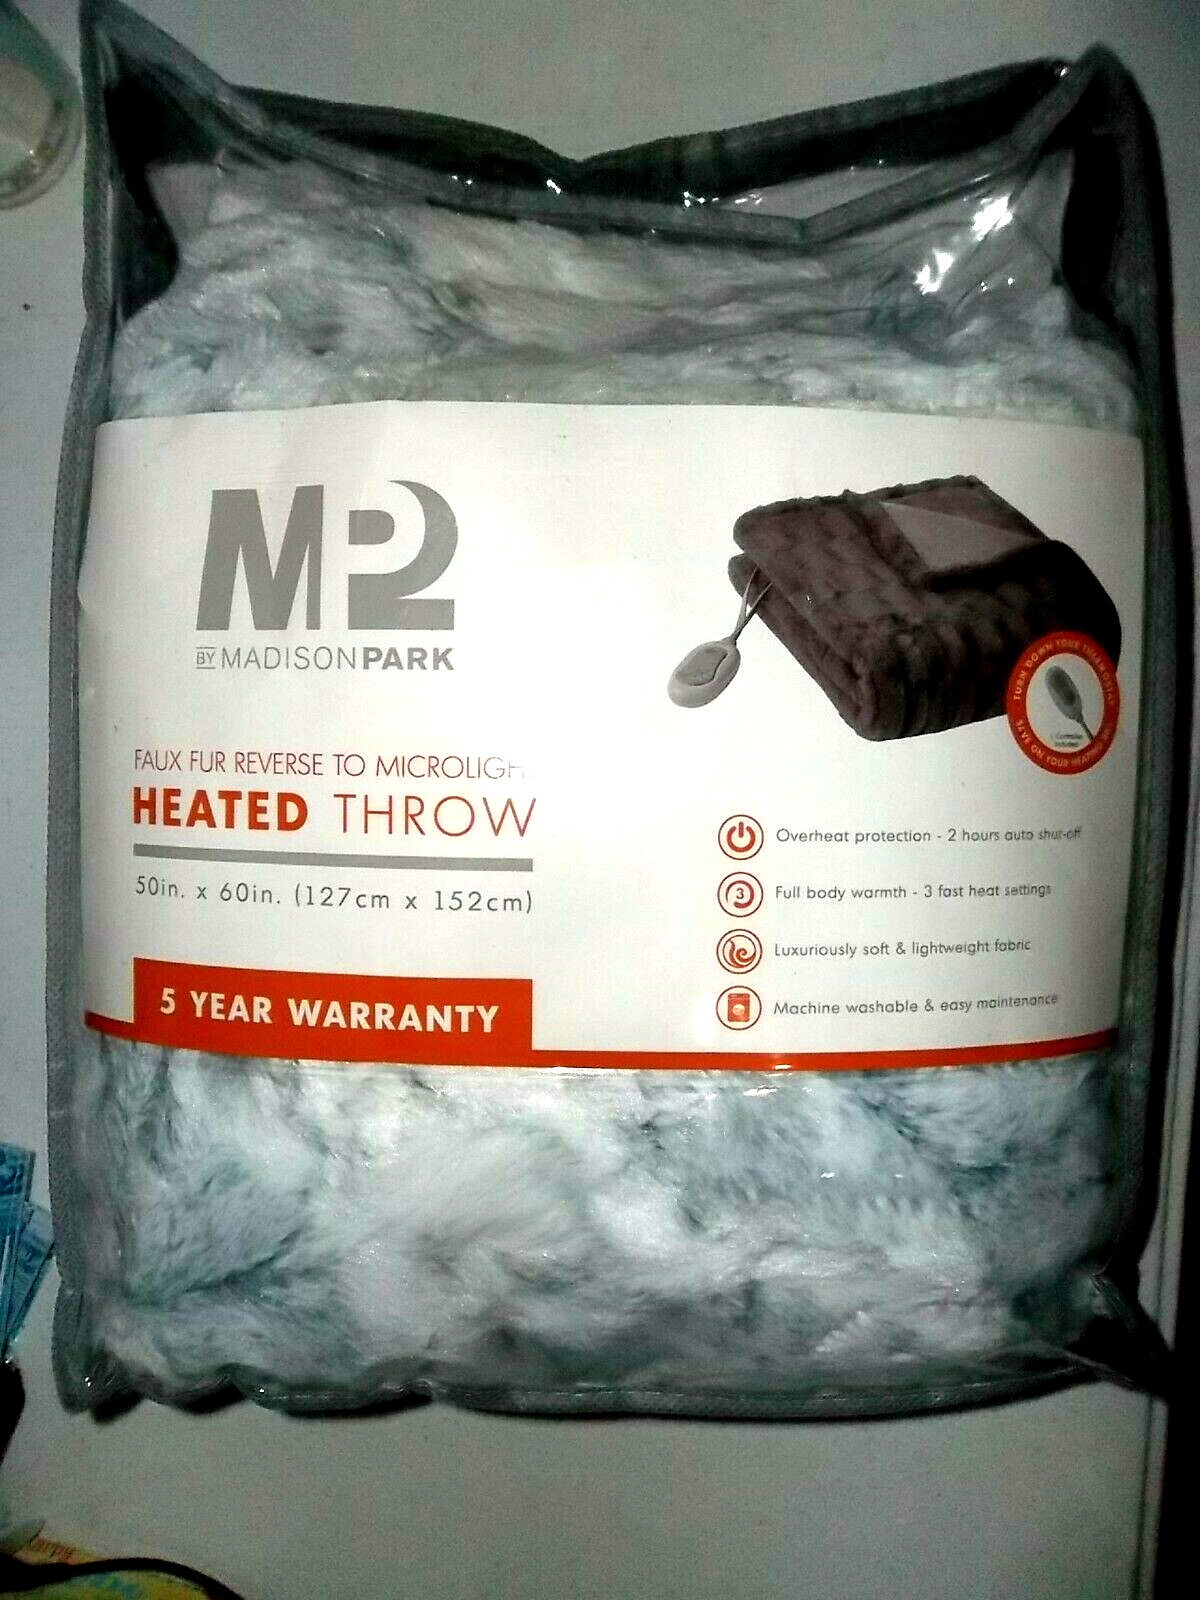 MP2 By Madison Park Heated Throw/ Grey Heated Blanket 50in. x 60in. - $55.74